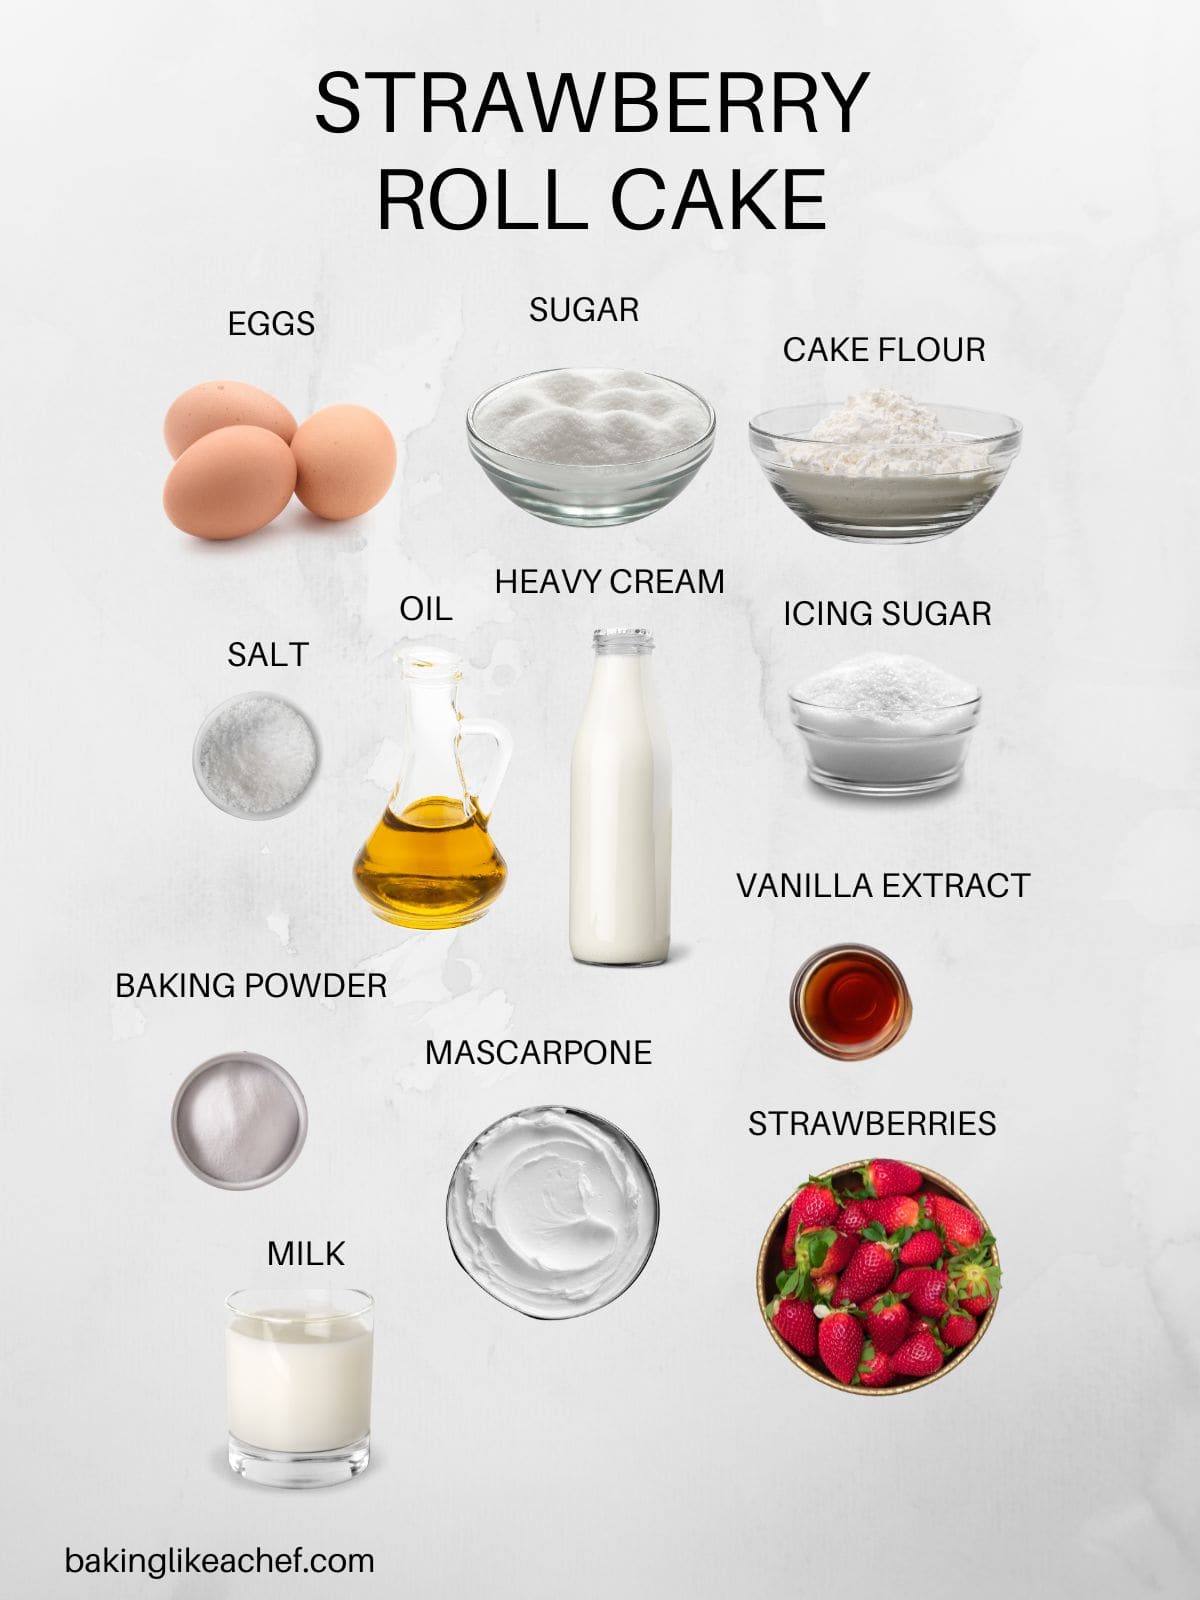 Japanese strawberry roll cake ingredients in pictures